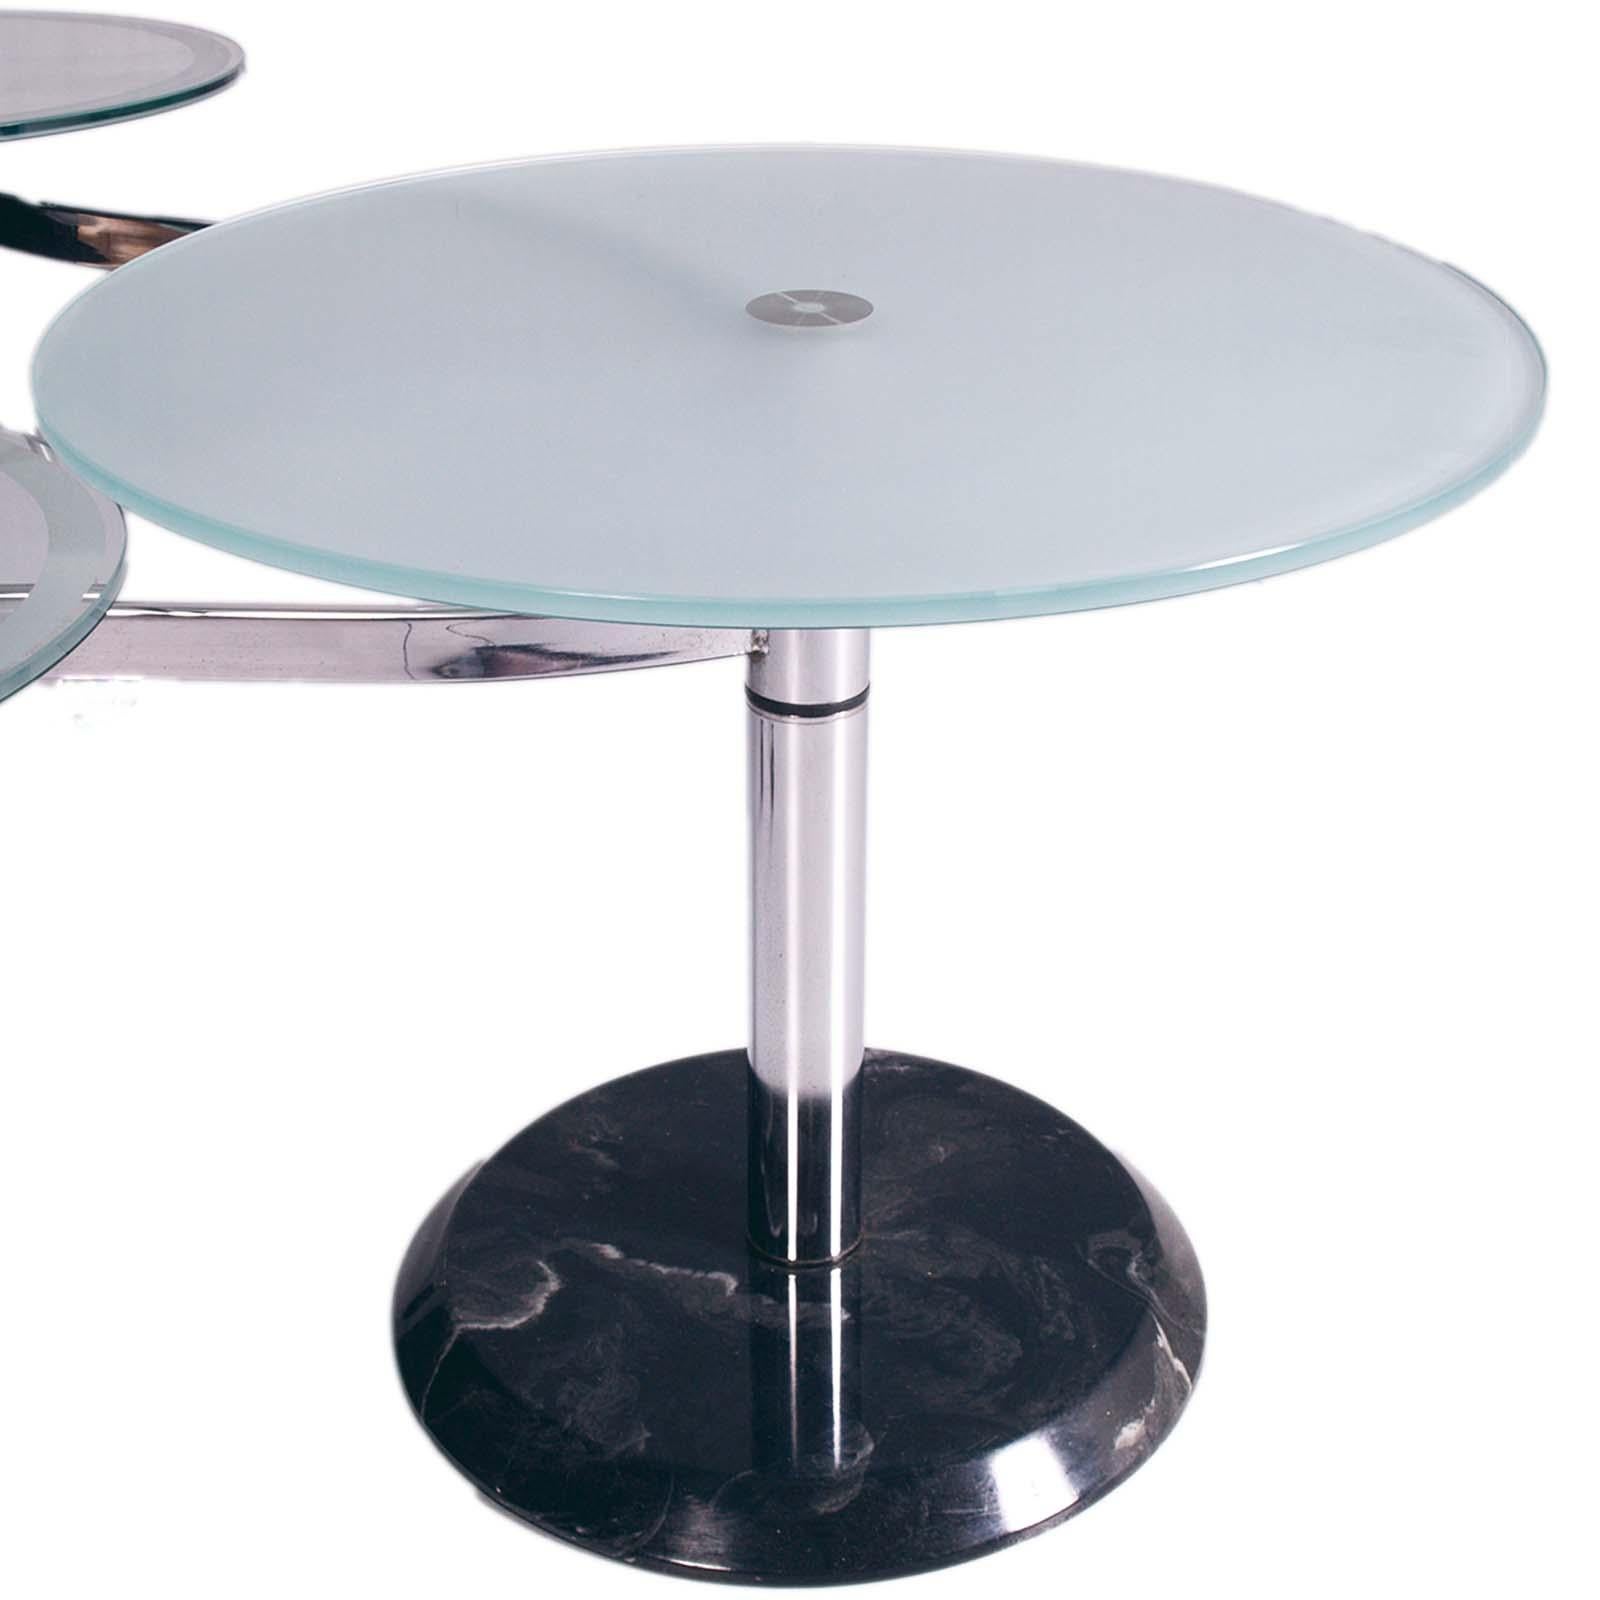 1970s Round Coffee Table with Two Rotating Satellites, Crystal, Chromed, Marble In Good Condition For Sale In Vigonza, Padua